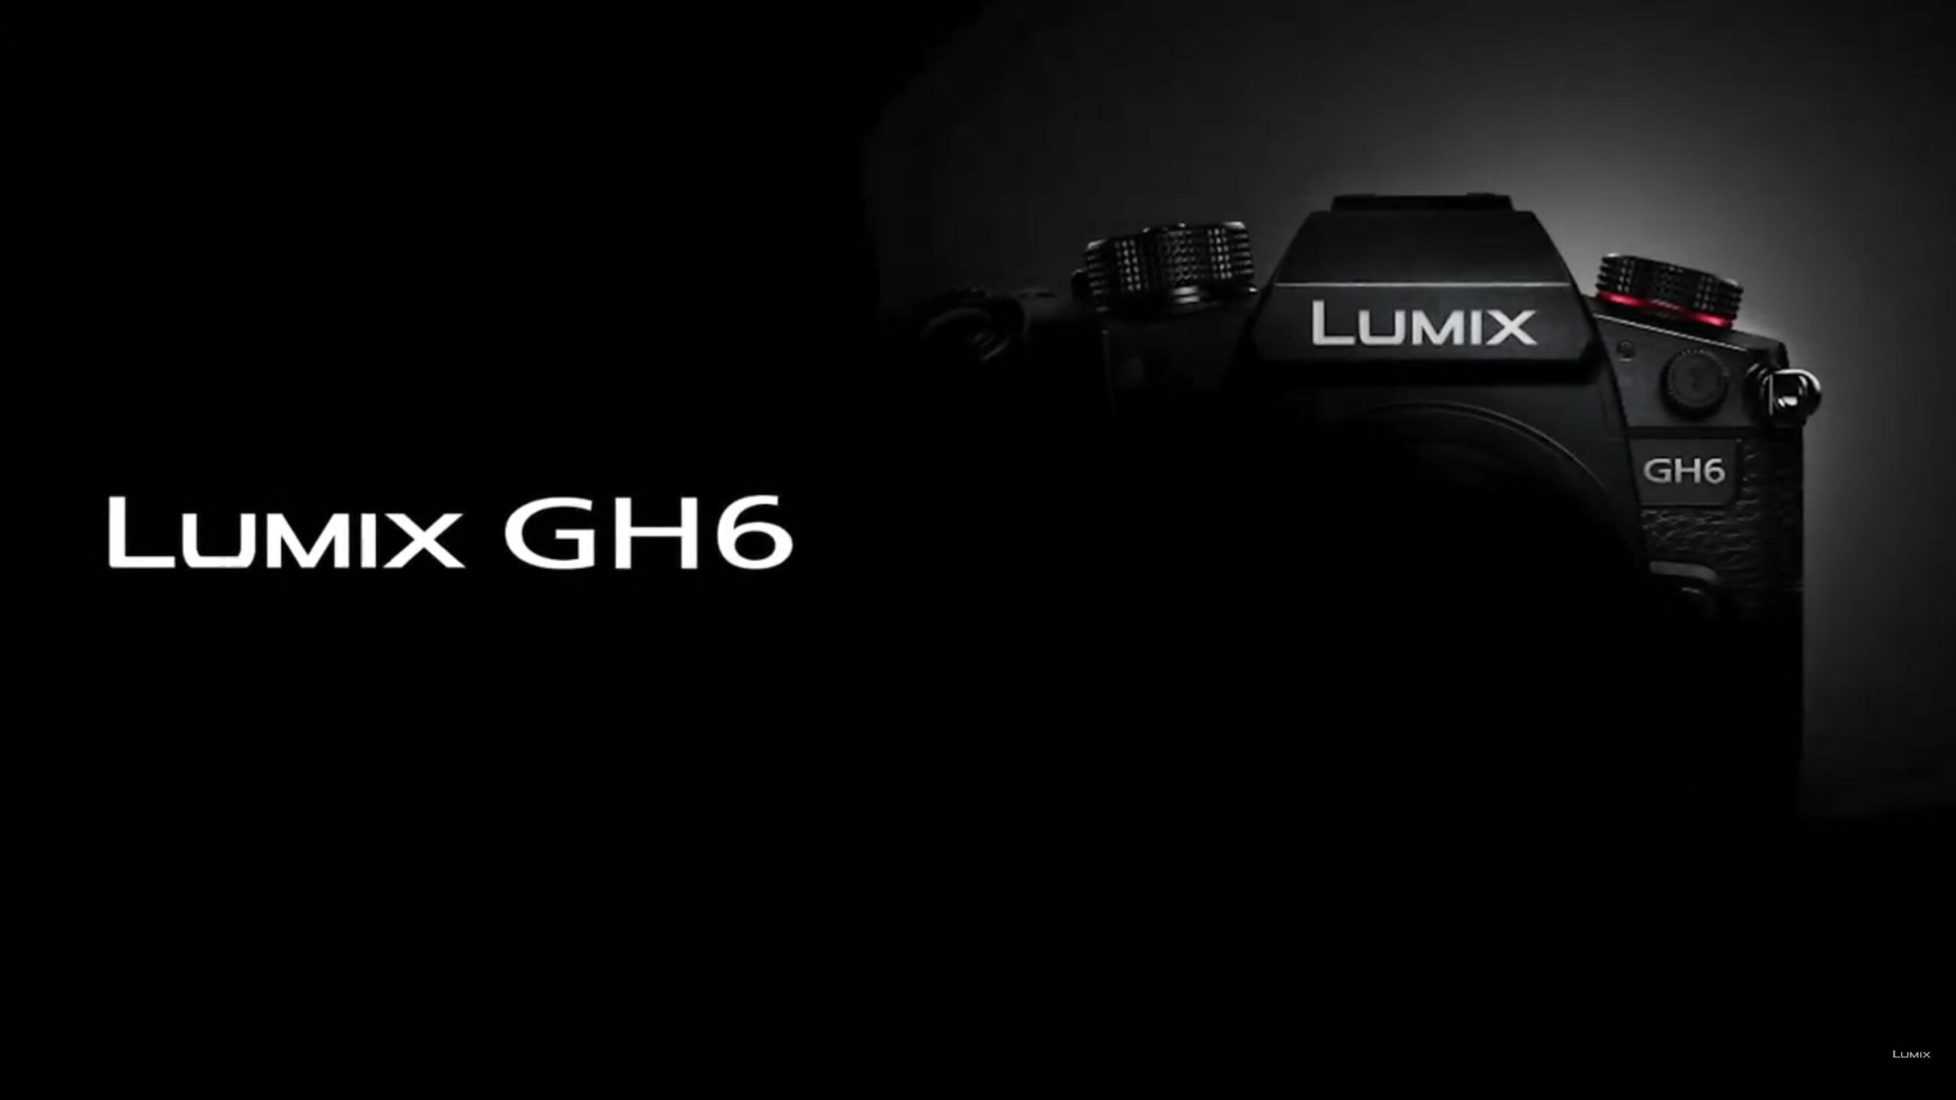 Gewend Slagschip Inspecteren Yes, the Panasonic Lumix GH6 is actually coming! And it shoots 4K/120, 5.7K/ 60fps video | Stark Insider